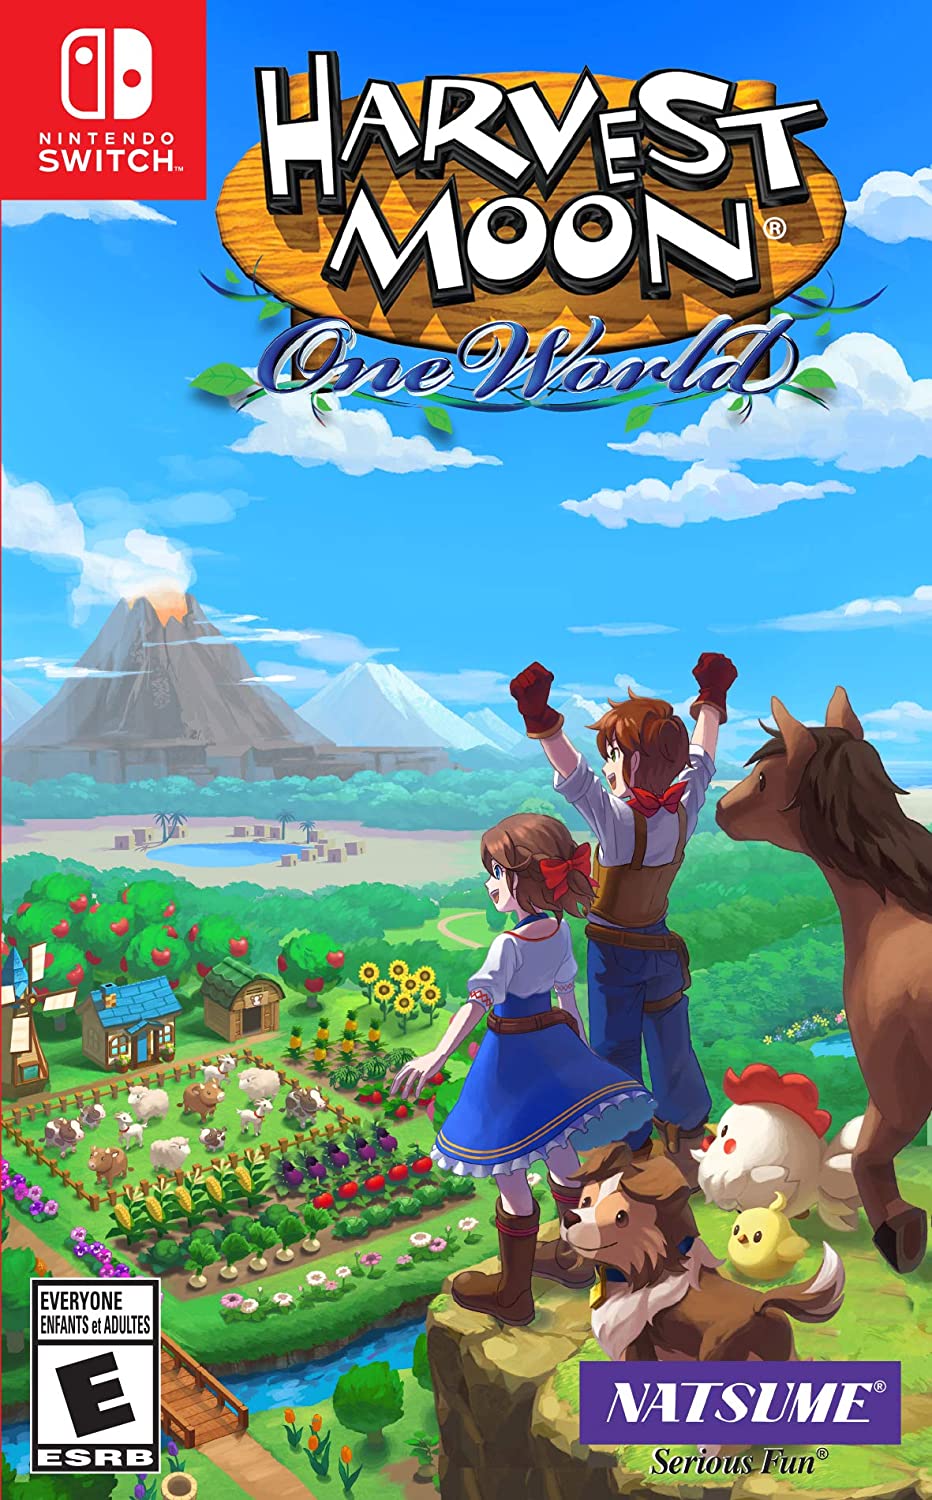 Harvest Moon: One World — StrategyWiki, the video game walkthrough and